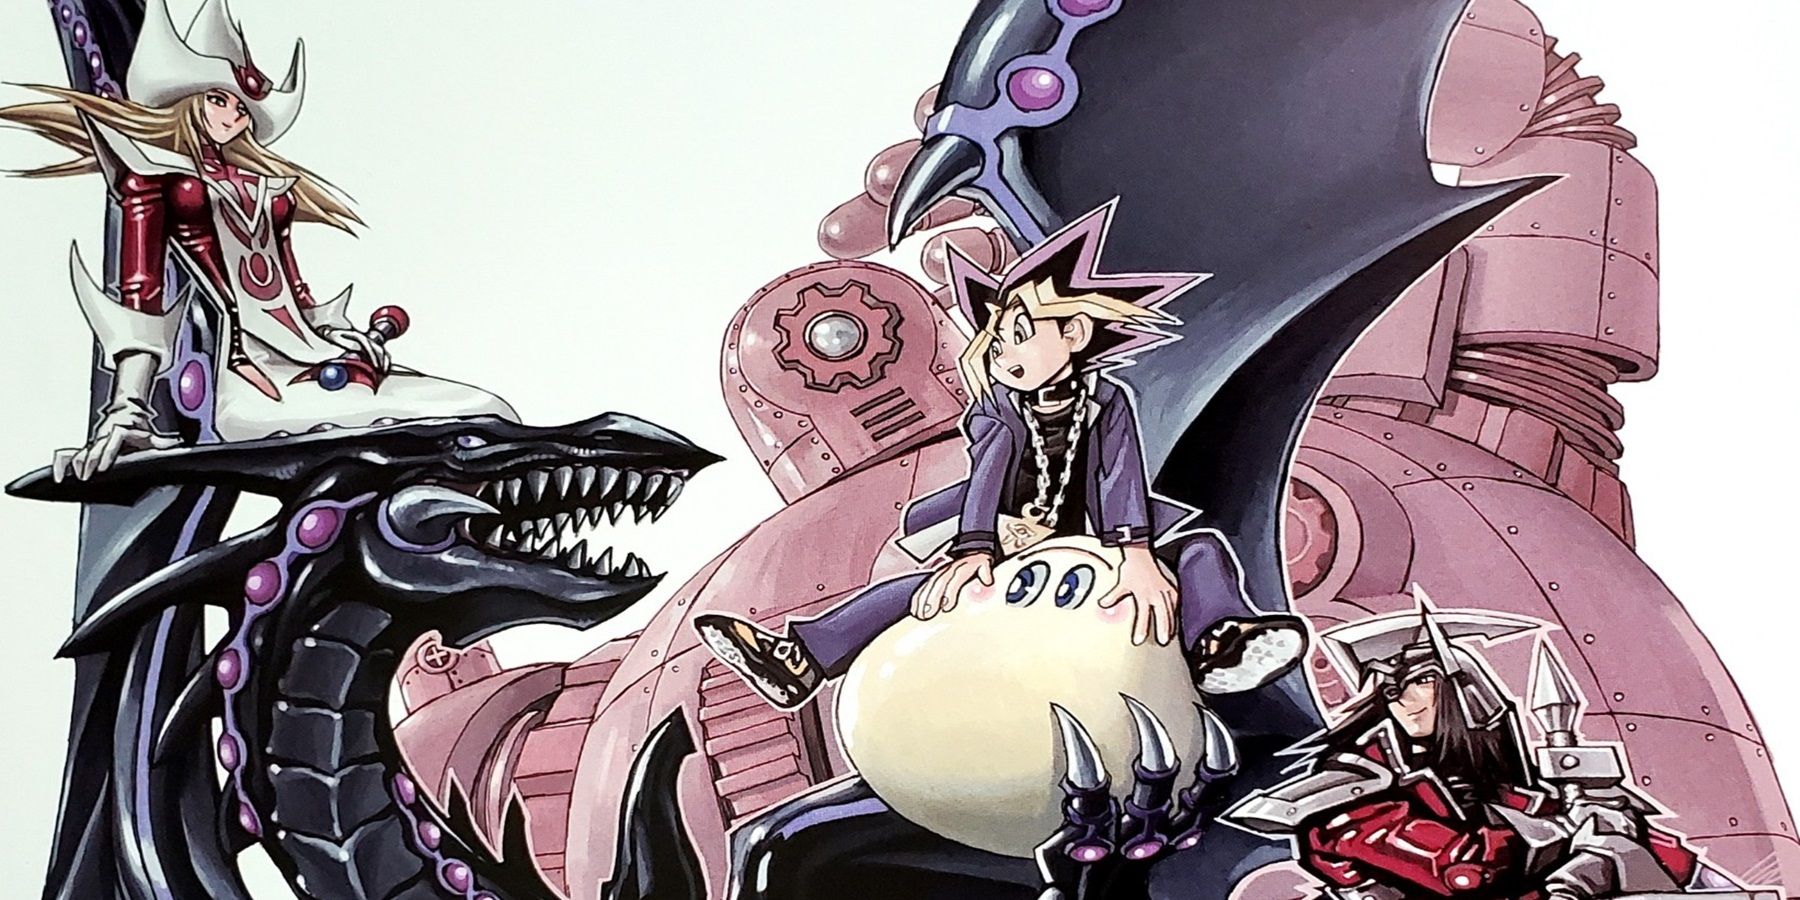 Yugi with his signature monsters